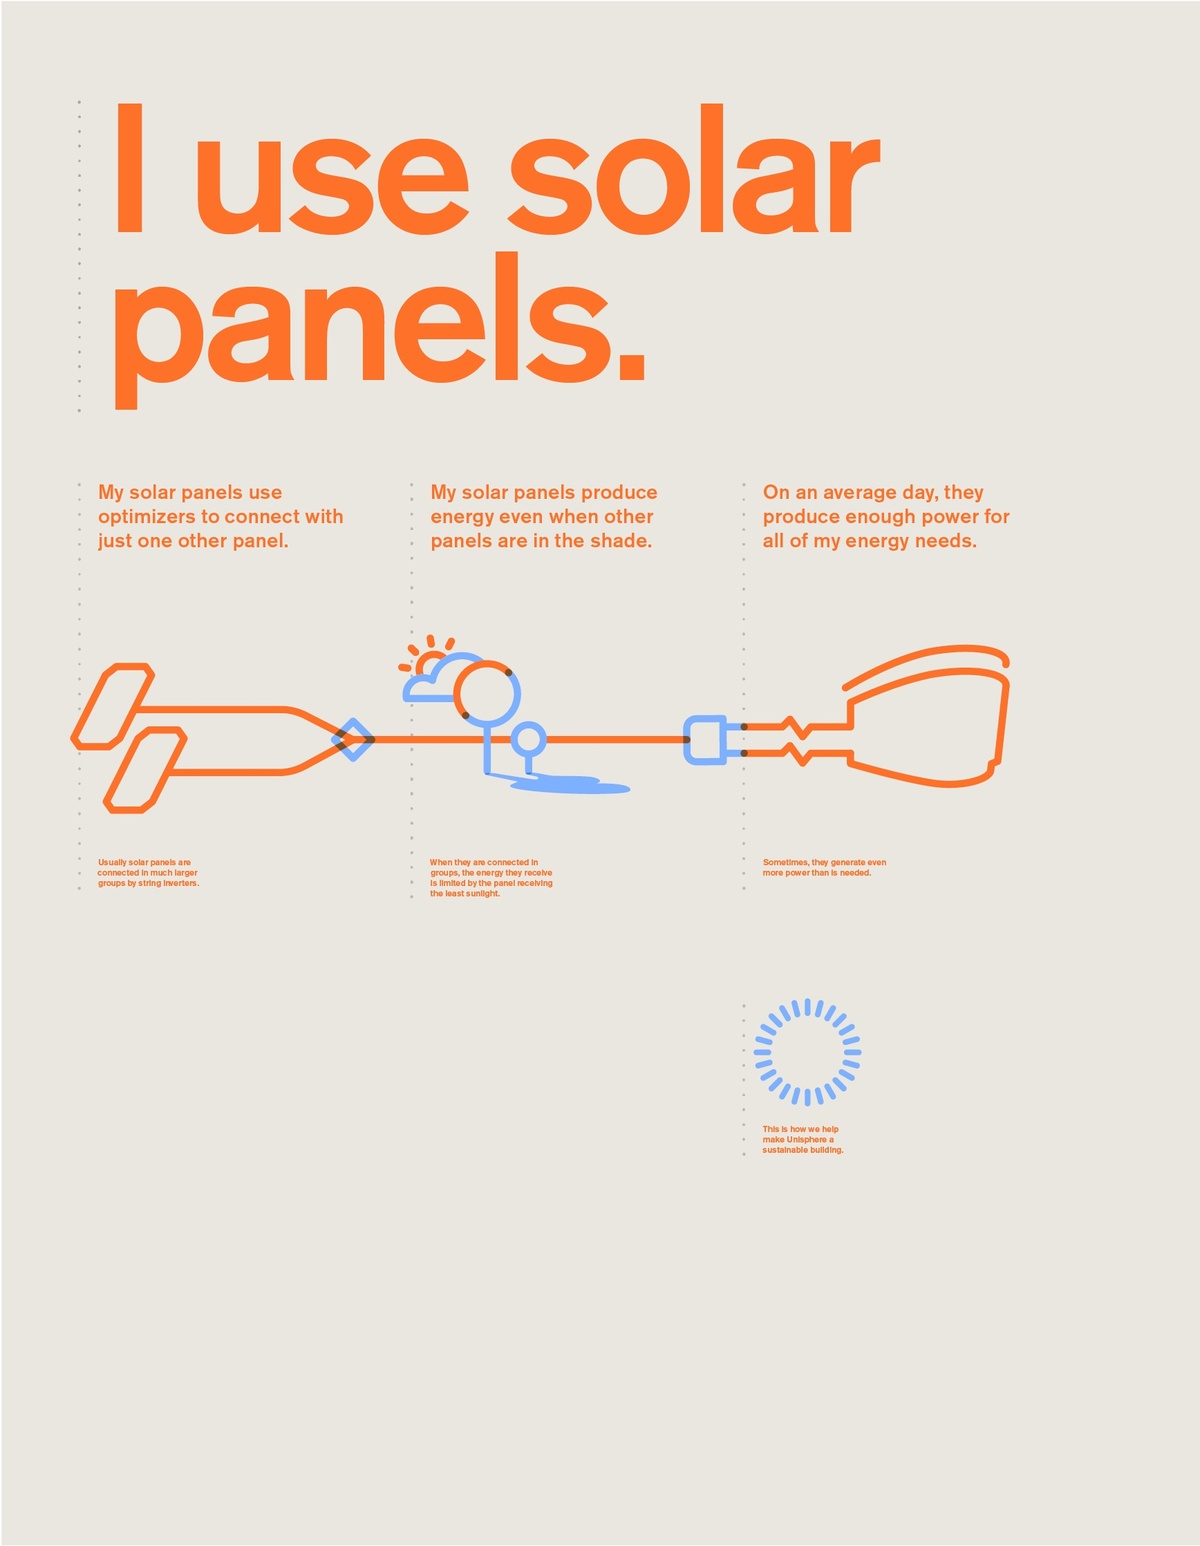 Informational panel that says "I use solar panels" in orange text with diagram underneath